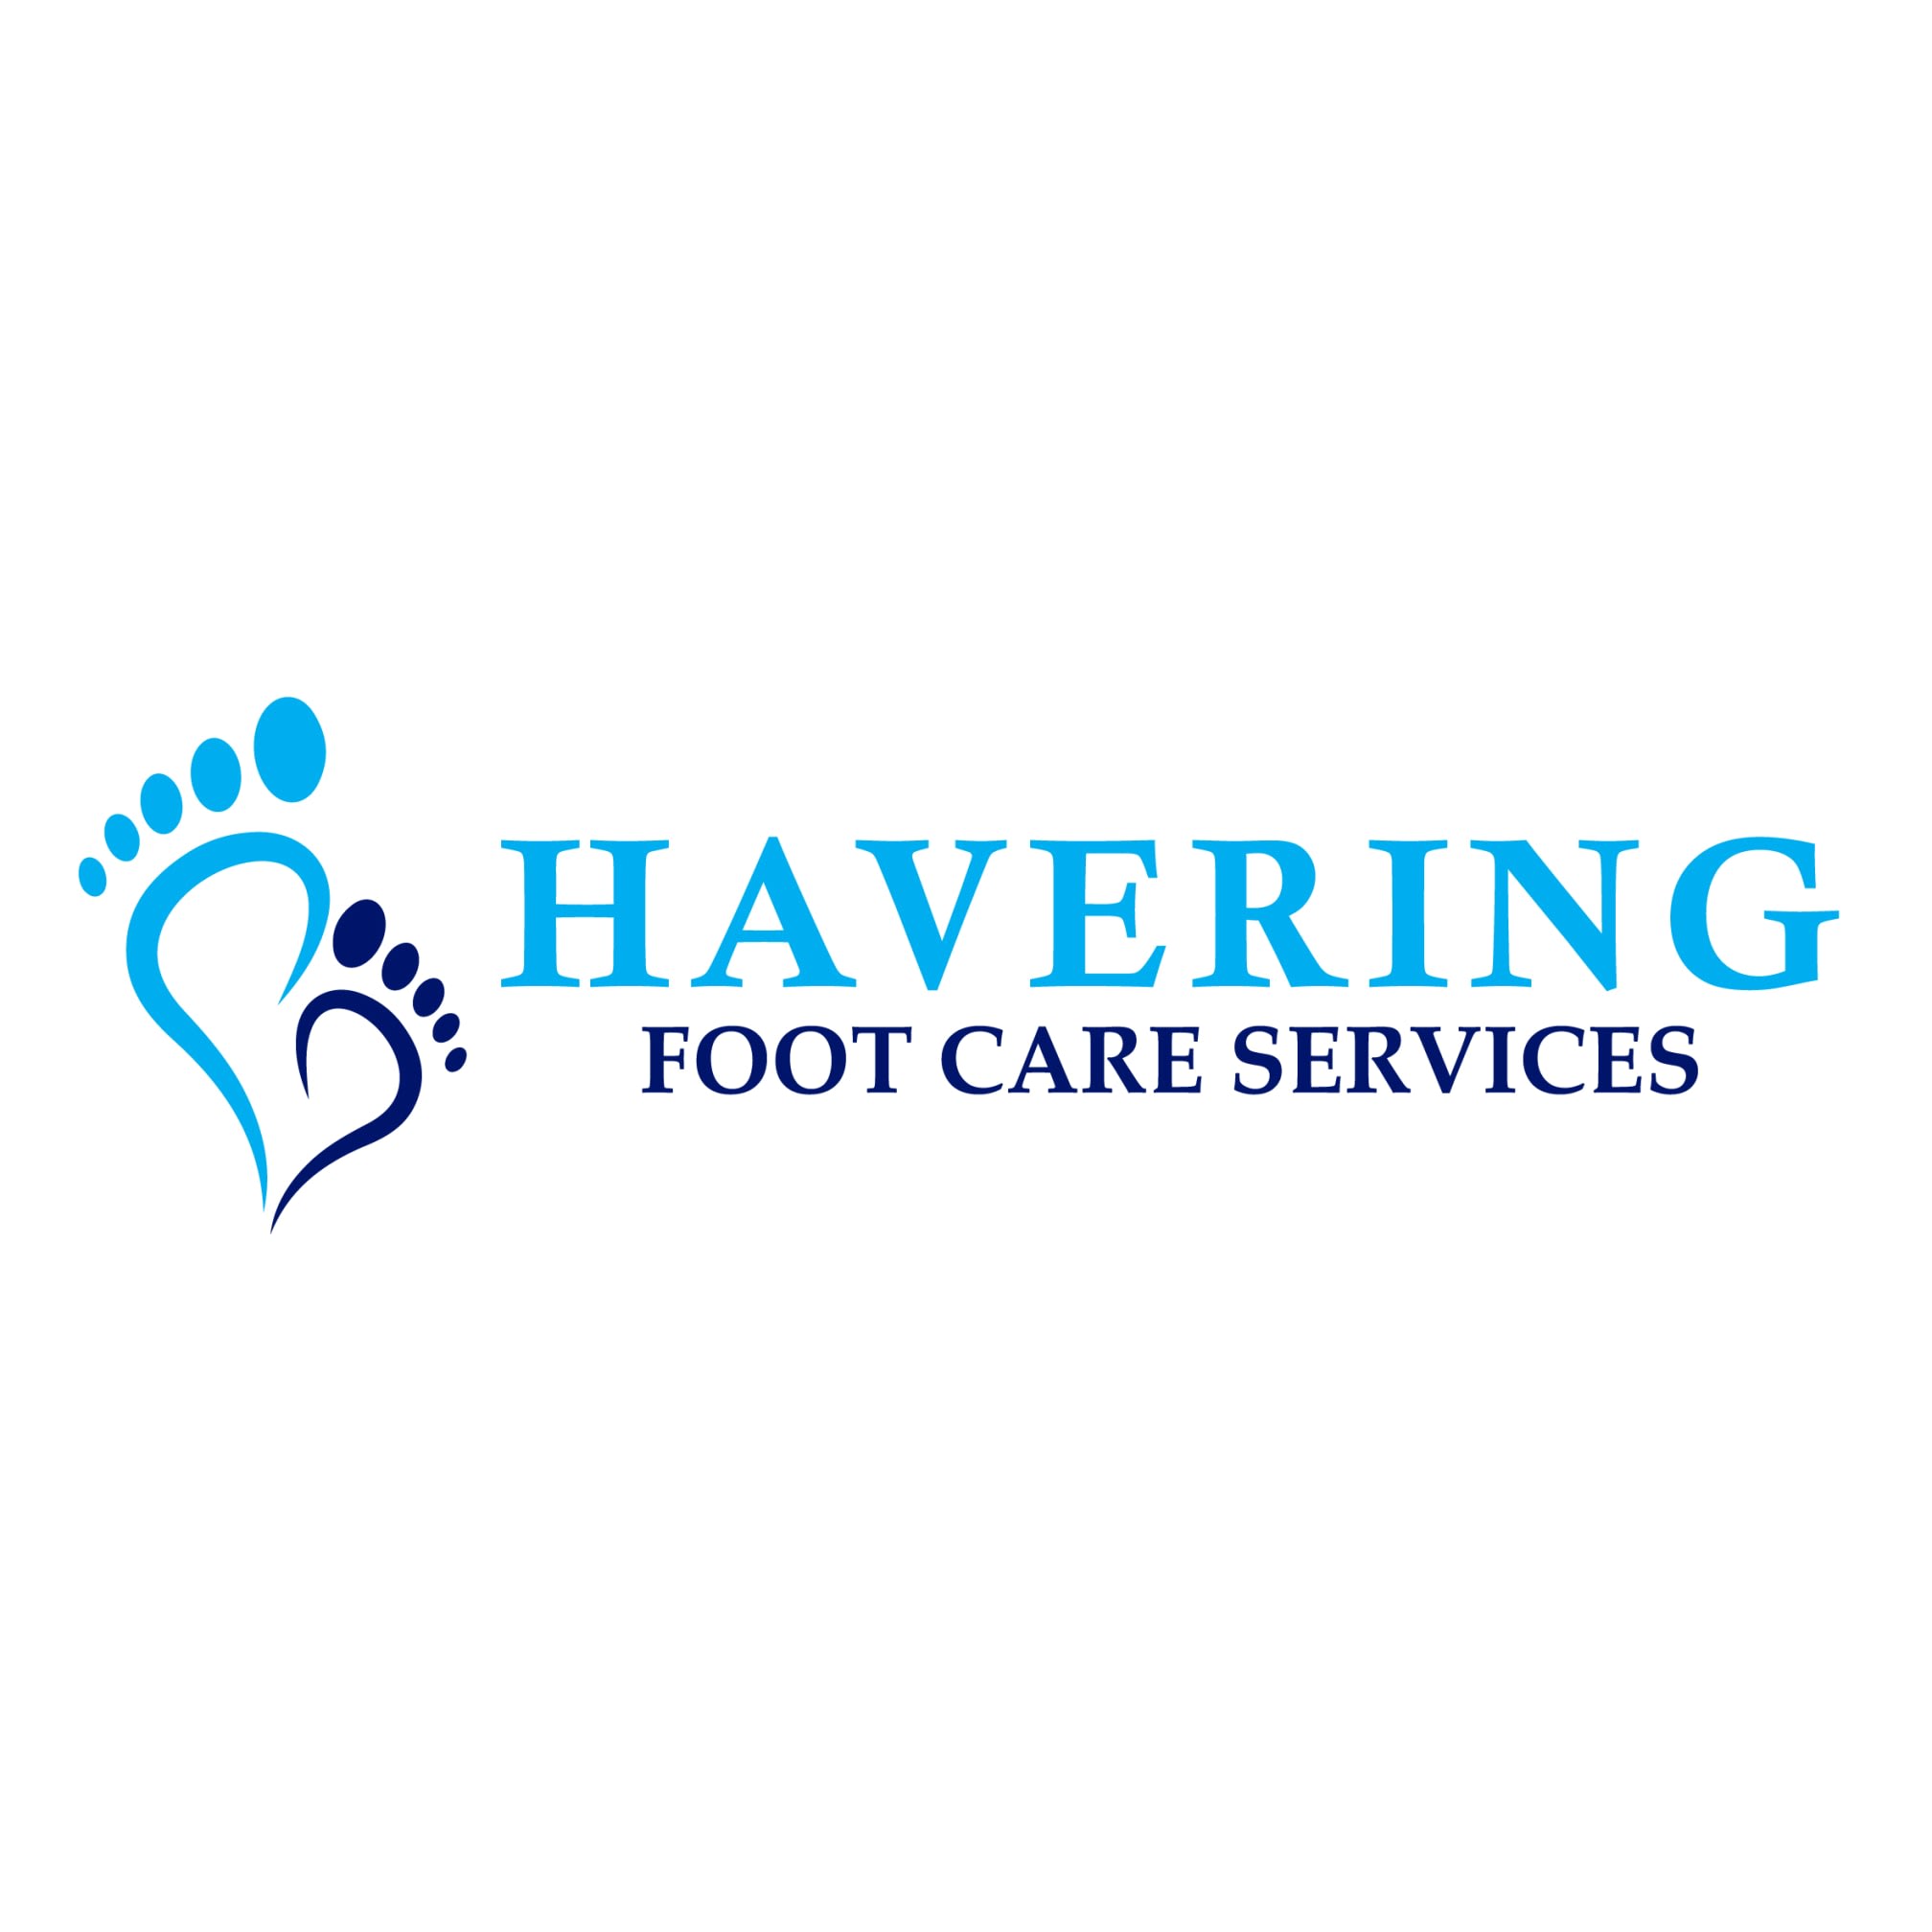 Mobile Foot Care Services Hornchurch 07305 242850